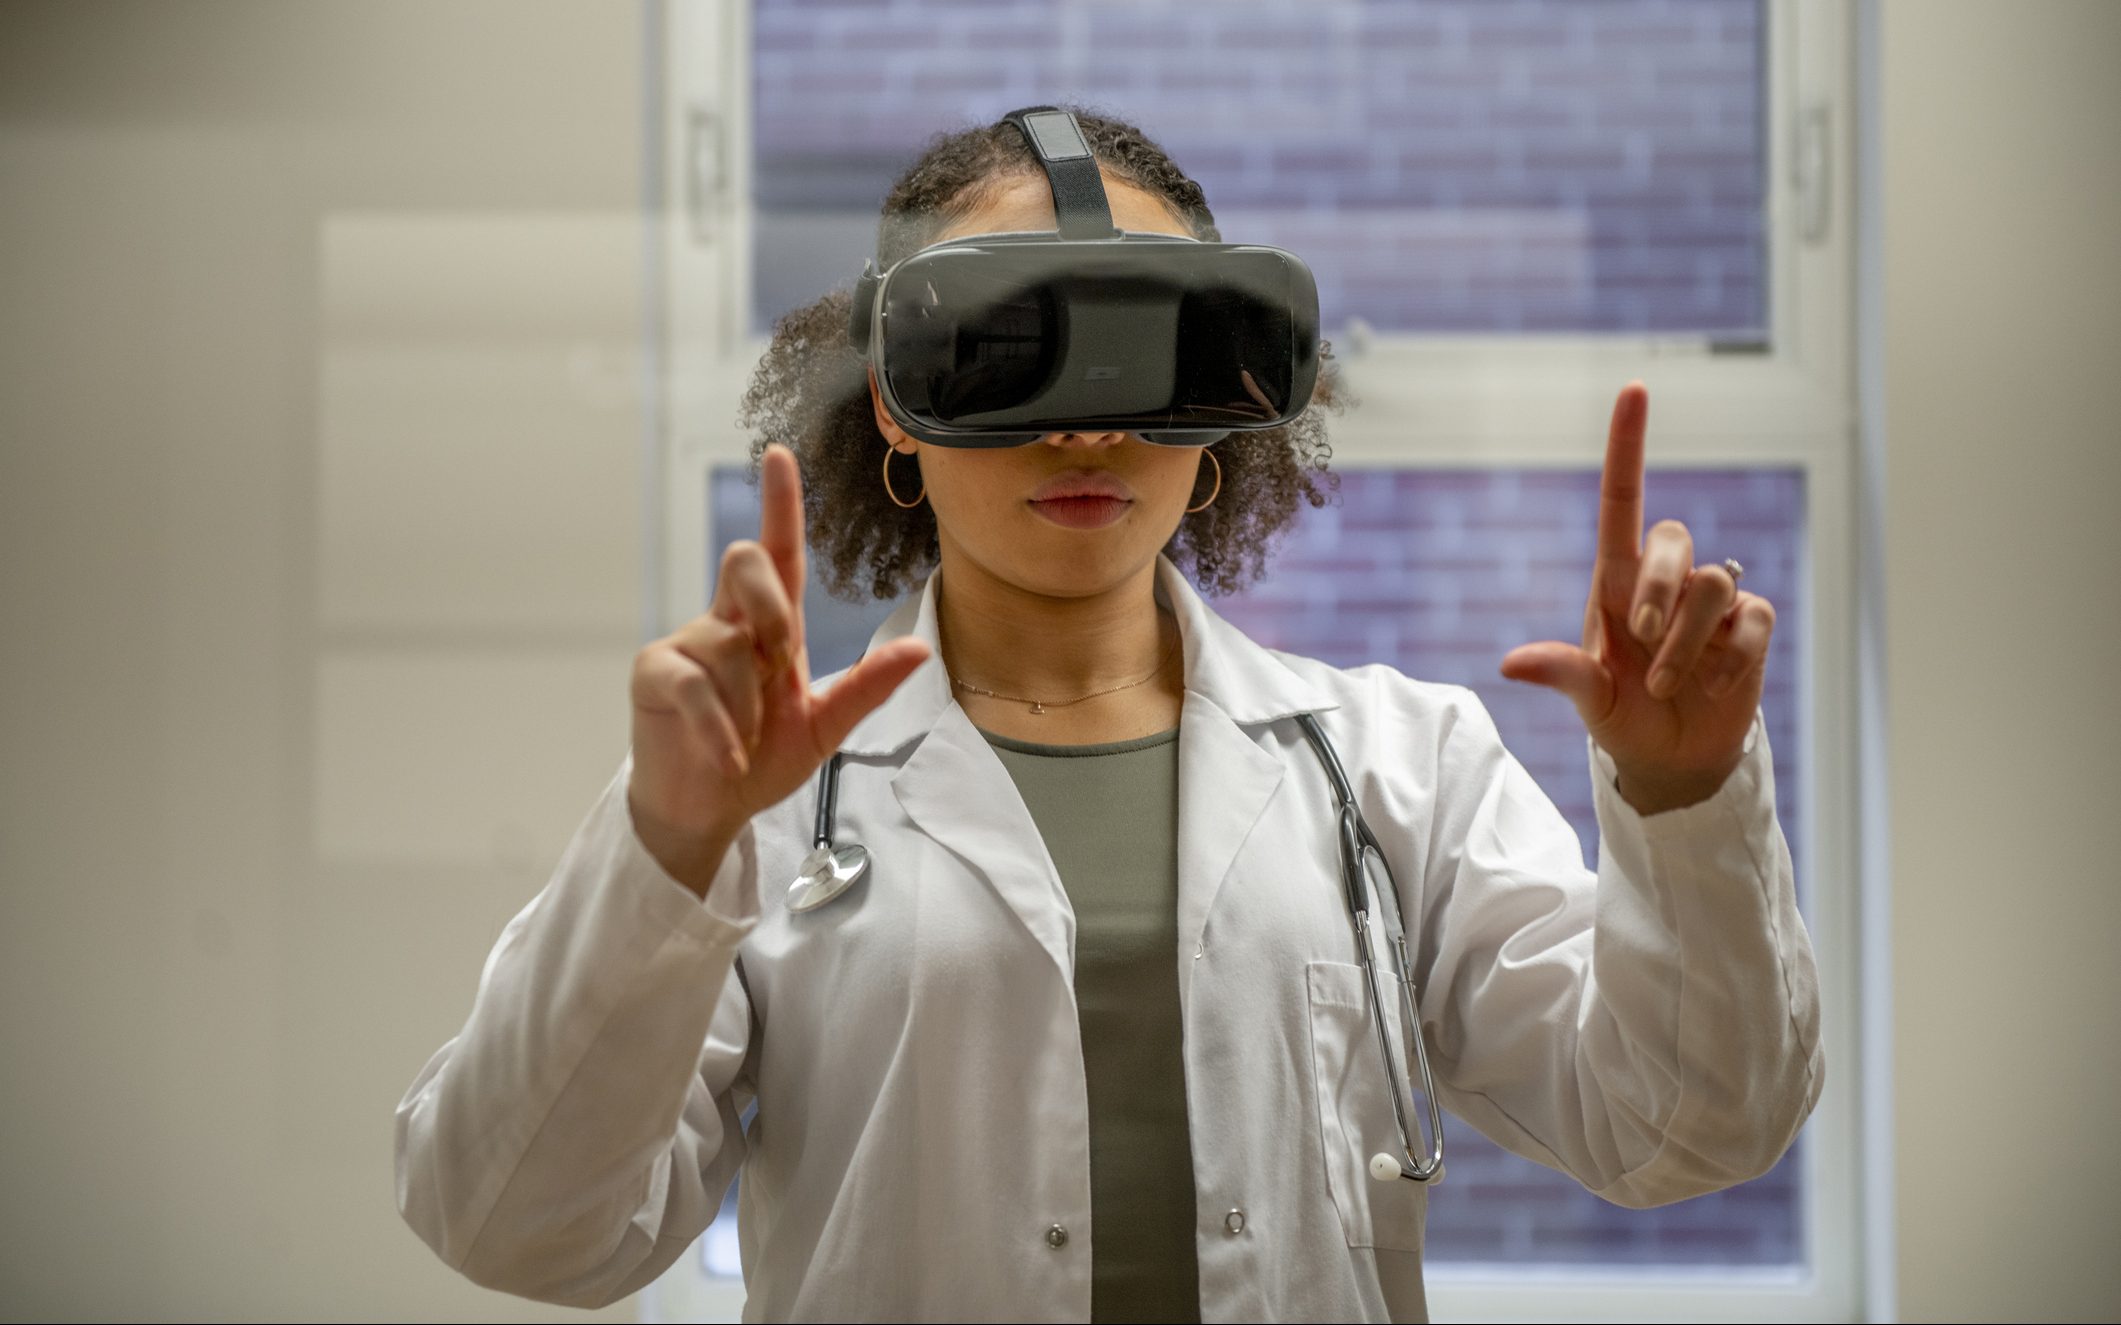 Female medical professional using a virtual reality headset in a clinic to explore a medical case for educational purposes.